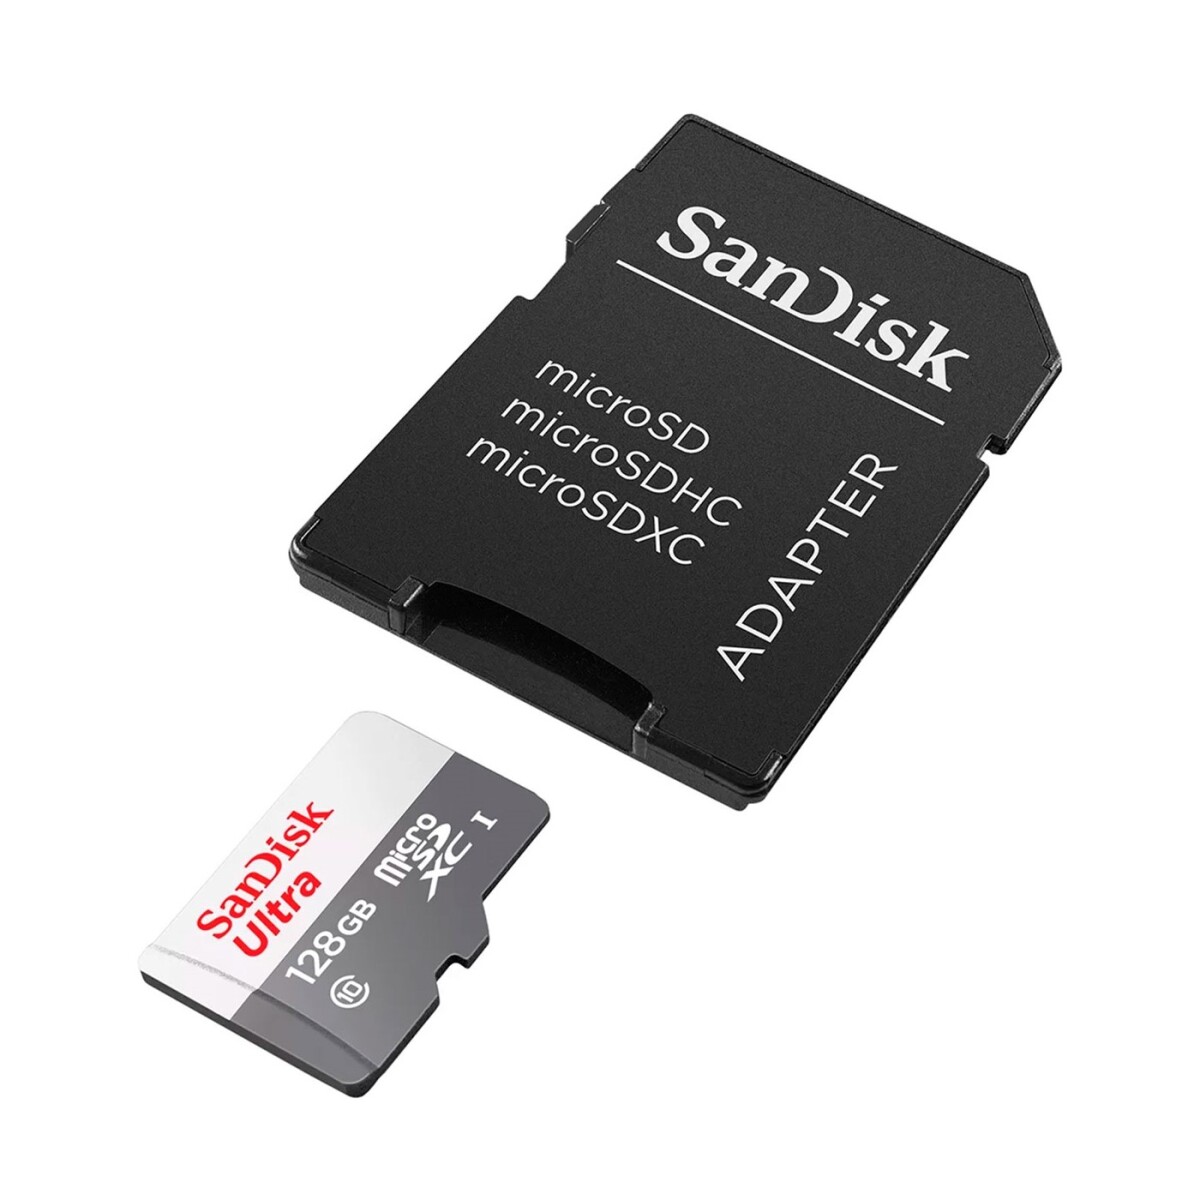 Micro sd sandisk uhs-i ultra 128gb clase 10 100mb/s + adaptador sd 